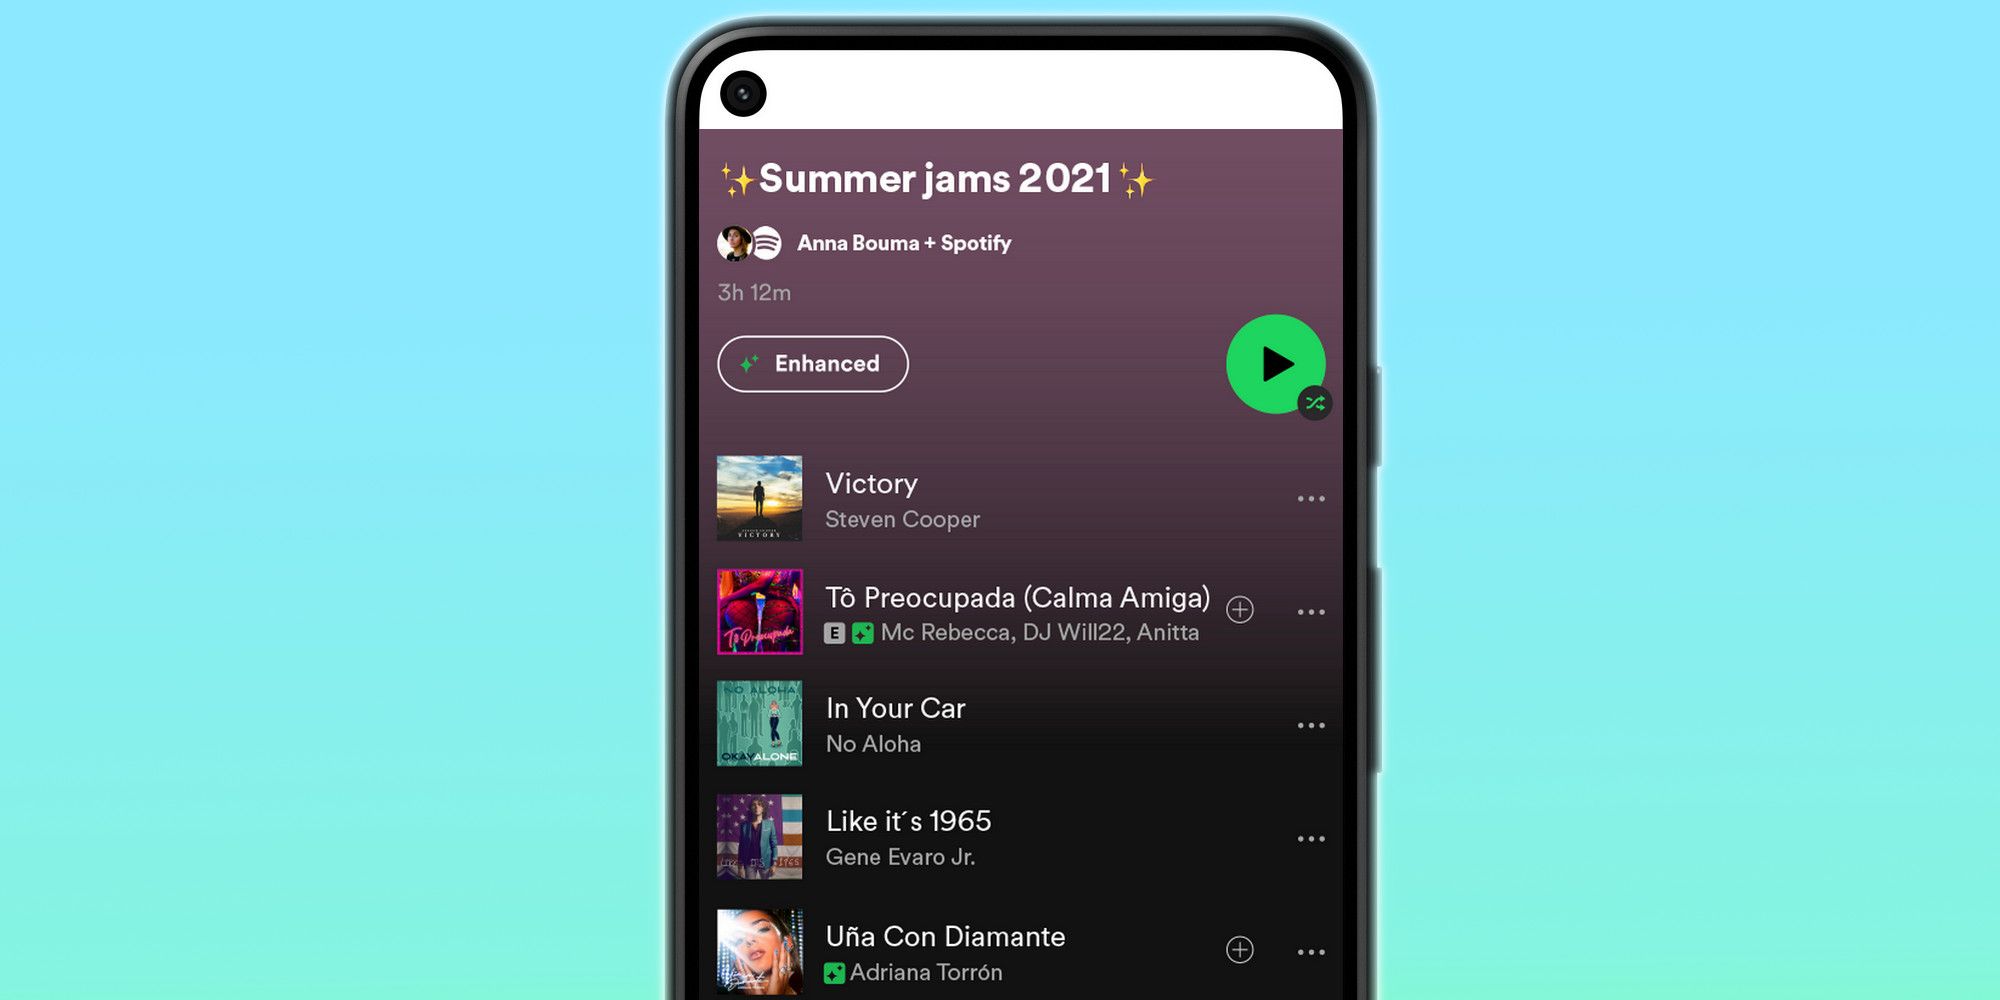 Turn On Enhanced & Spotify Will Improve Your Boring Playlists For You